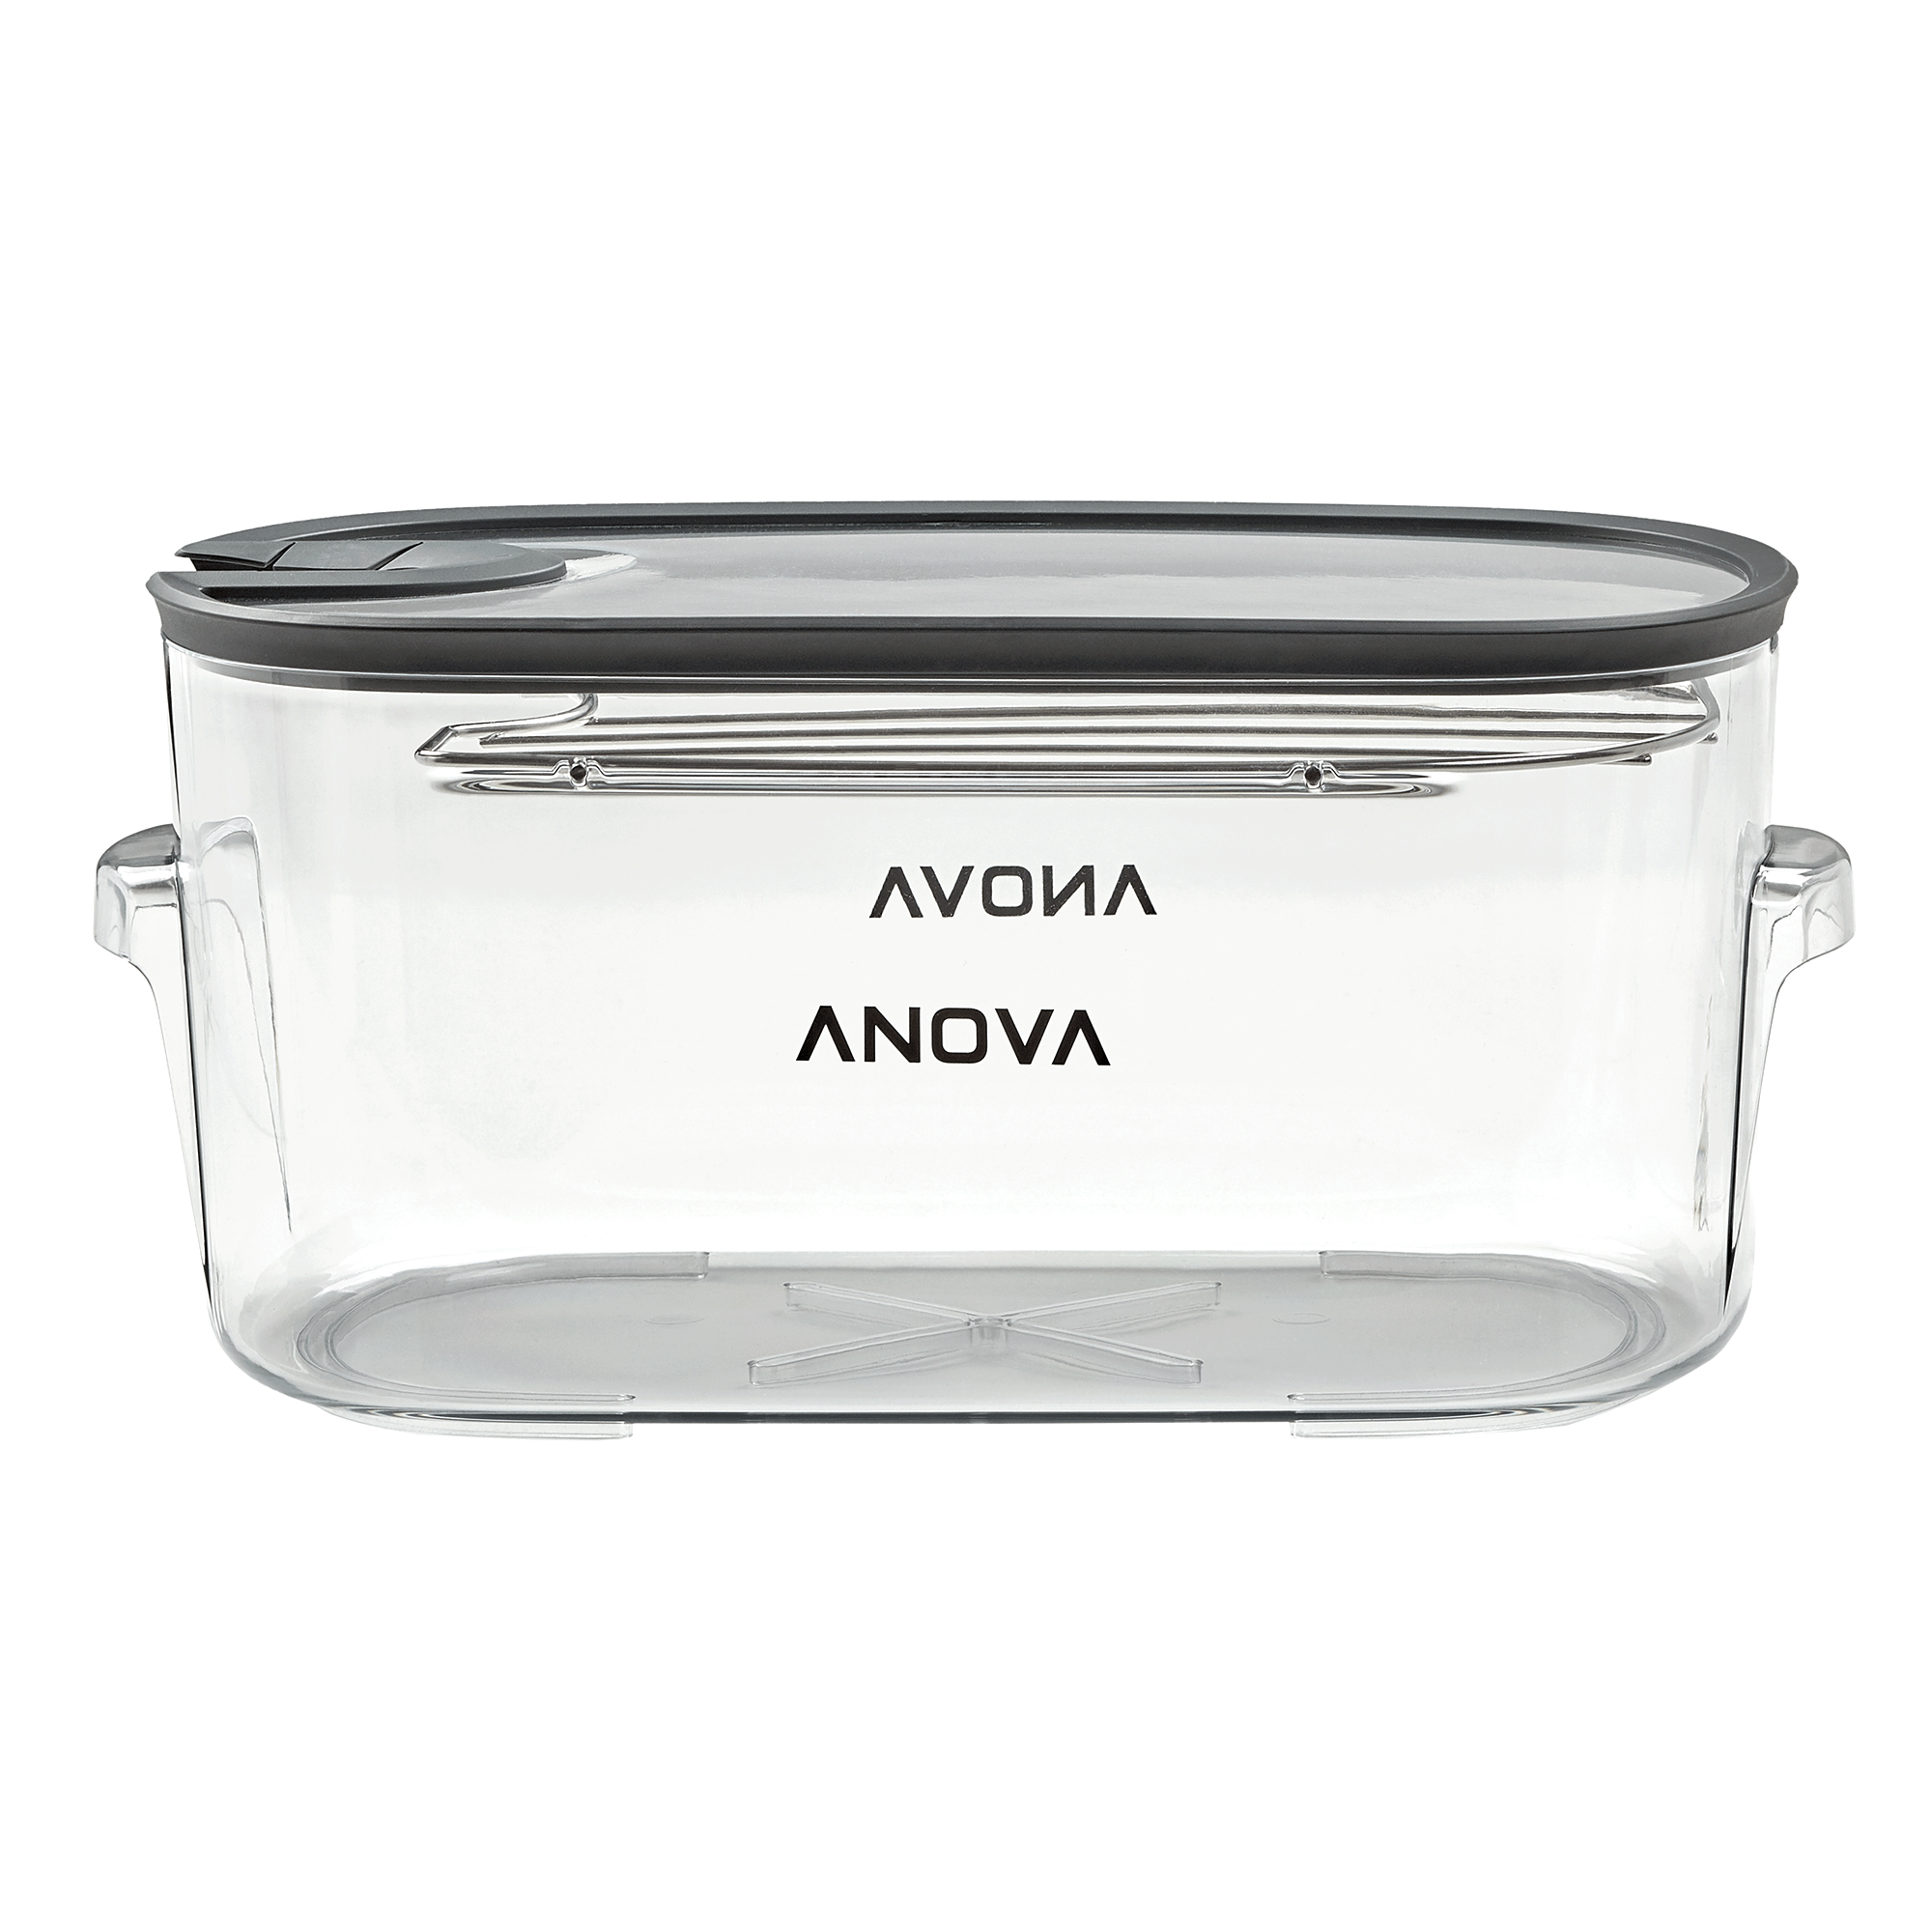 Anova Culinary Antc01 Sous Vide Cooker Cooking Container